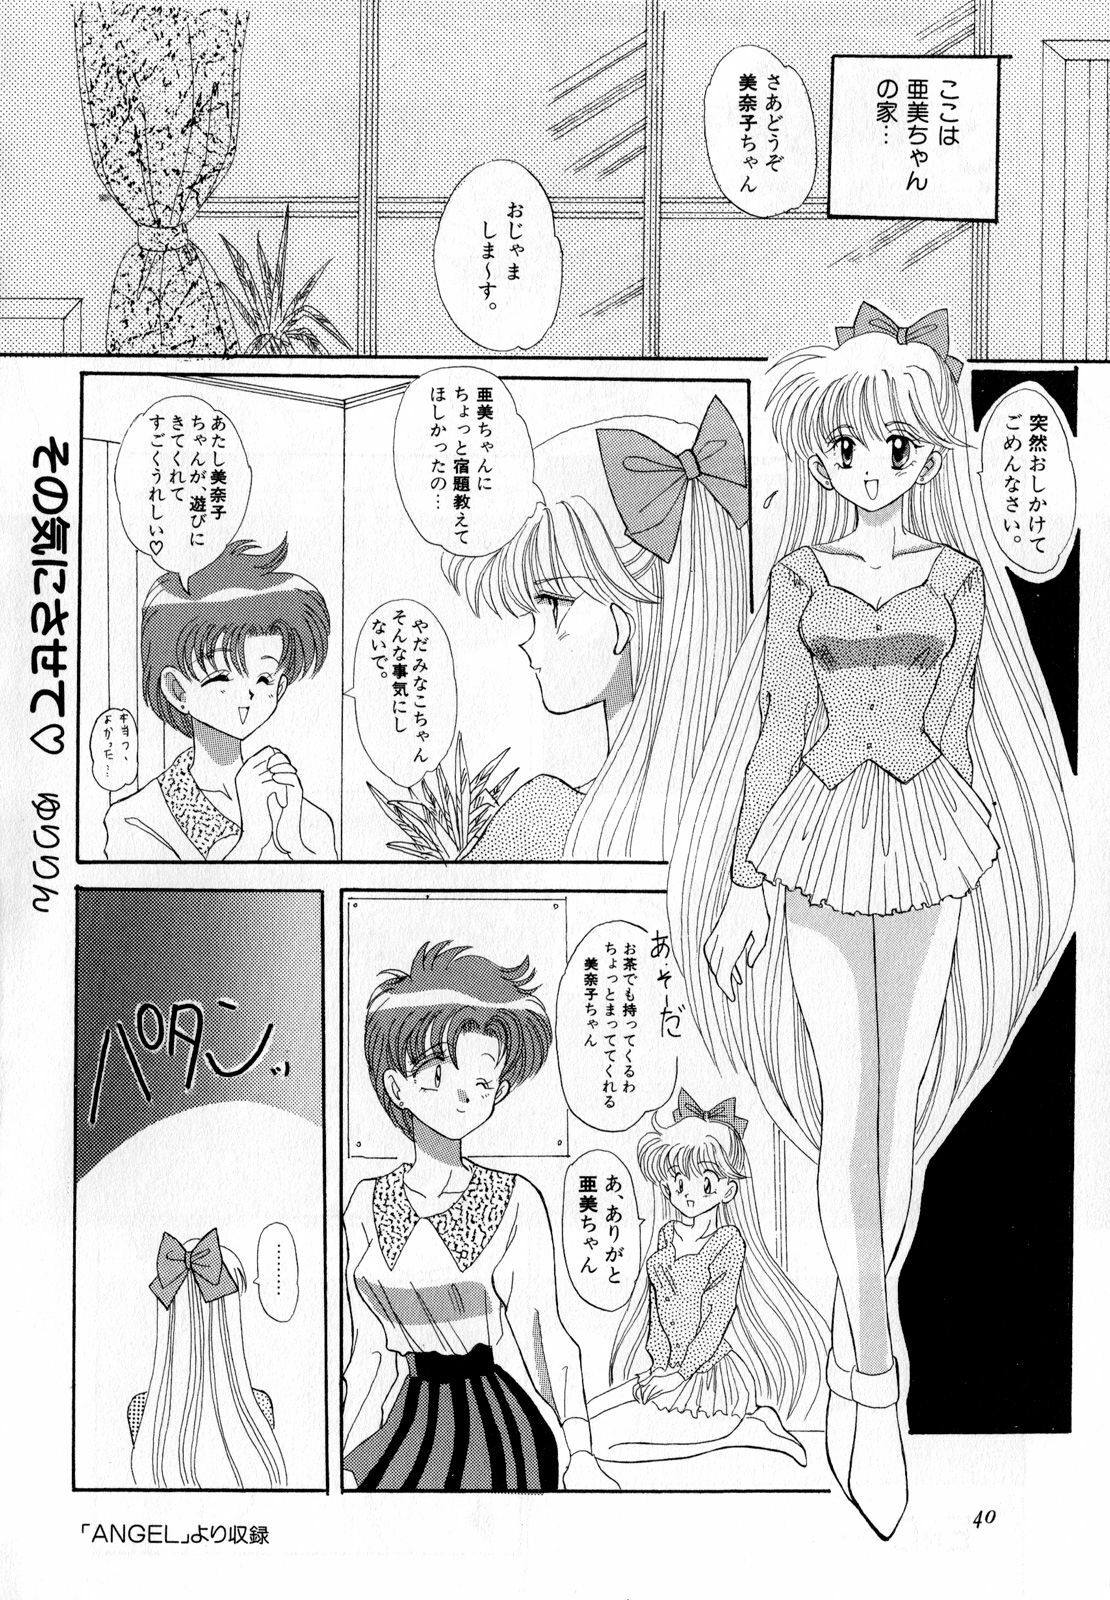 [Anthology] Lunatic Party 3 (Sailor Moon) page 41 full